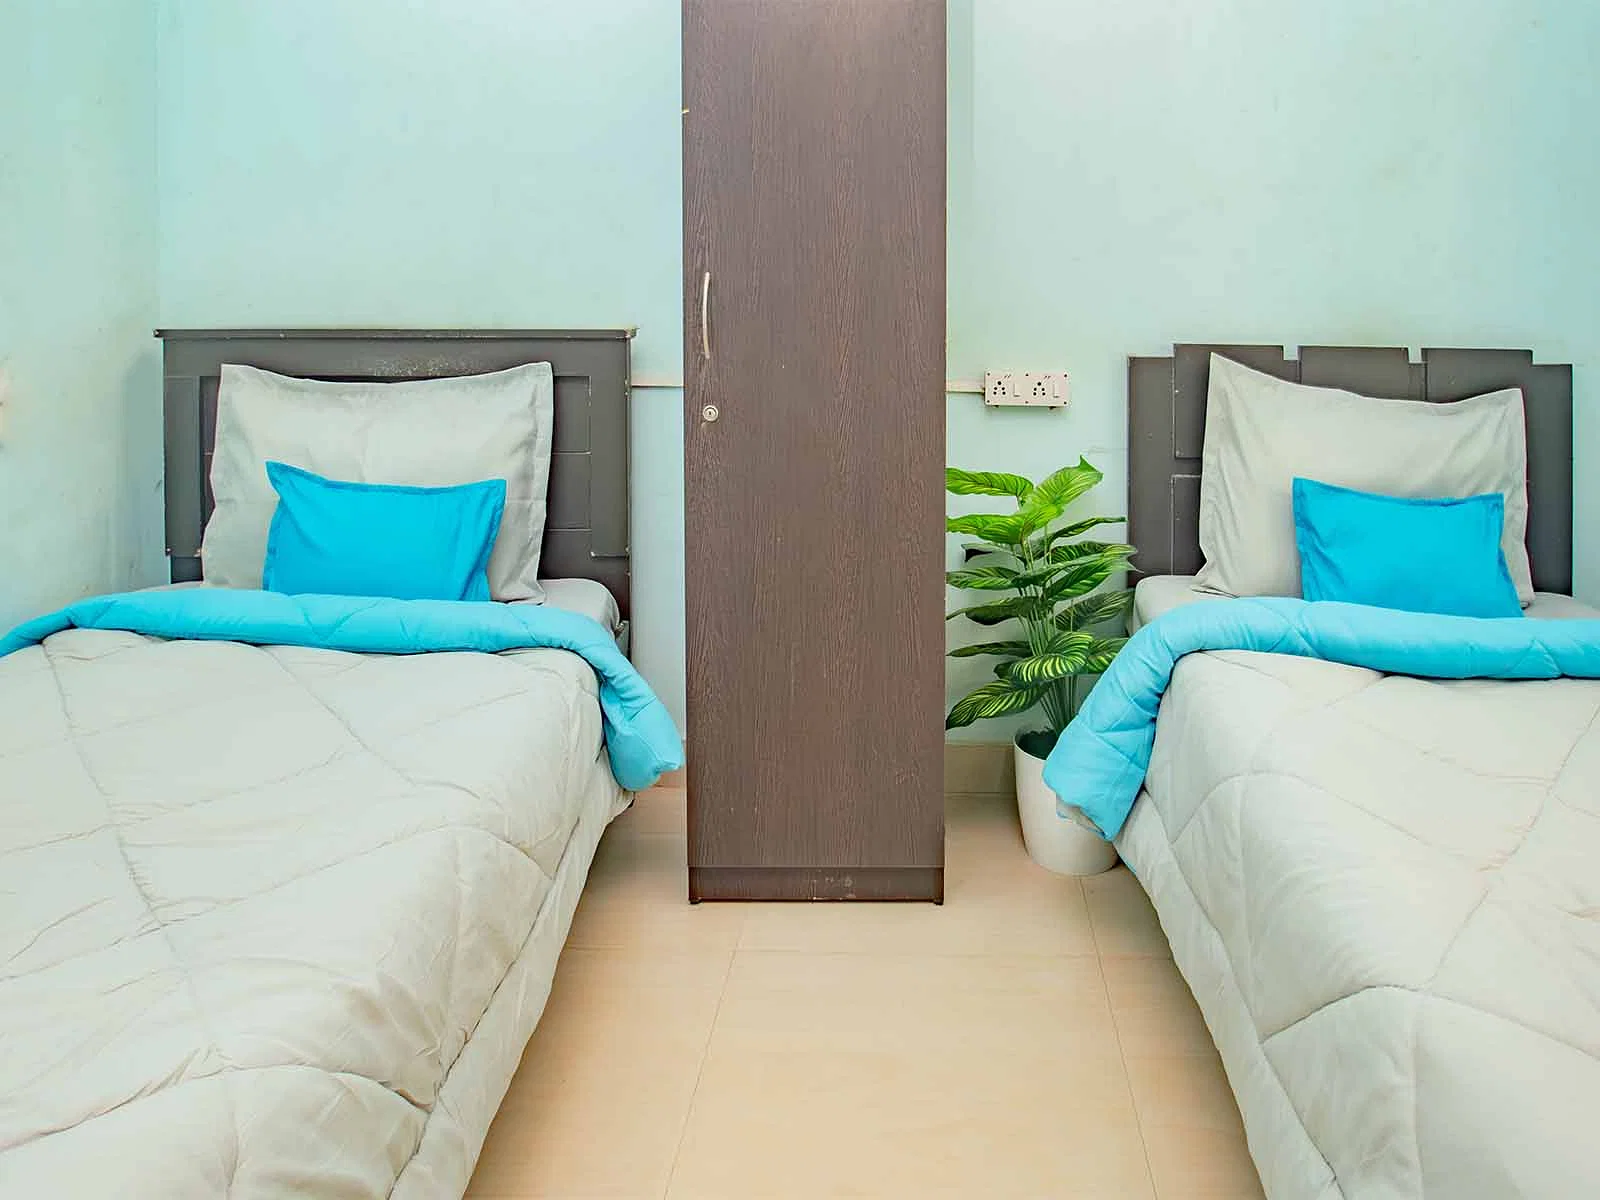 budget-friendly PGs and hostels for boys and girls with single rooms with daily hopusekeeping-Zolo Avni